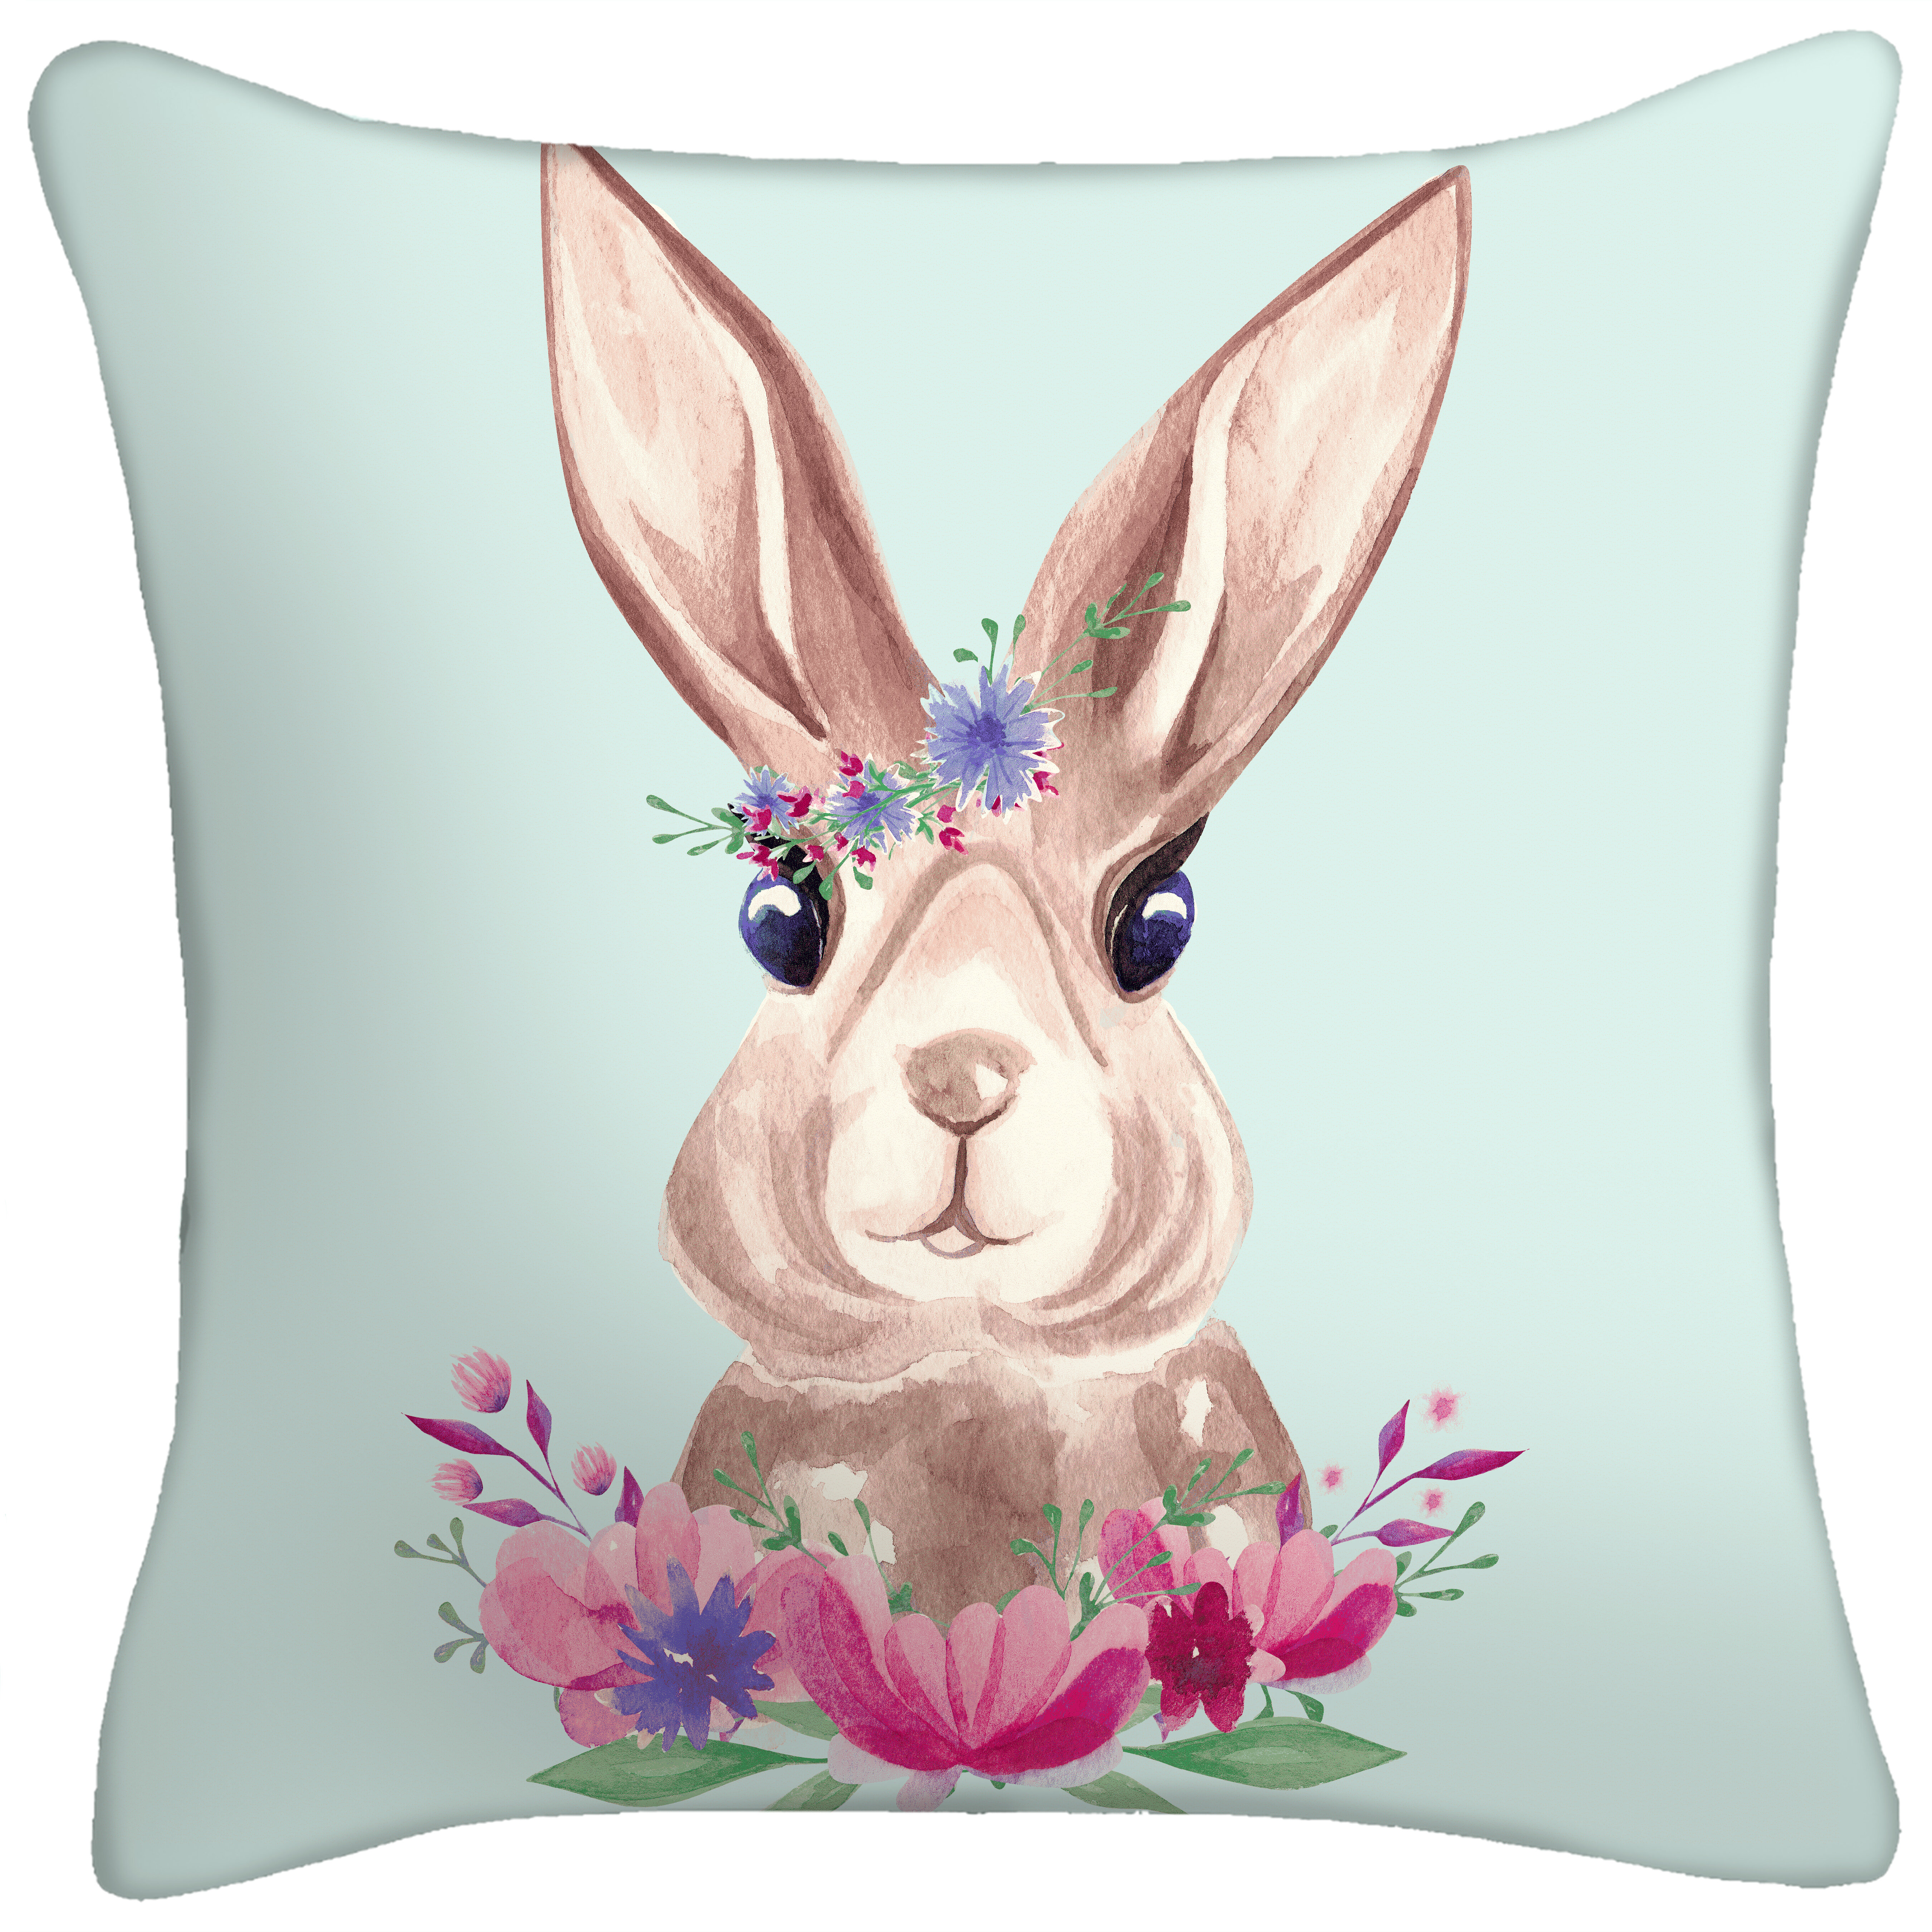 All Smiles Easter Decor Throw Pillow Covers Rabbit Bunnies with Eggs Outdoor Decorations Set of 4 Purple Flowers Spring Decorative Themed Cushion Covers 18x18